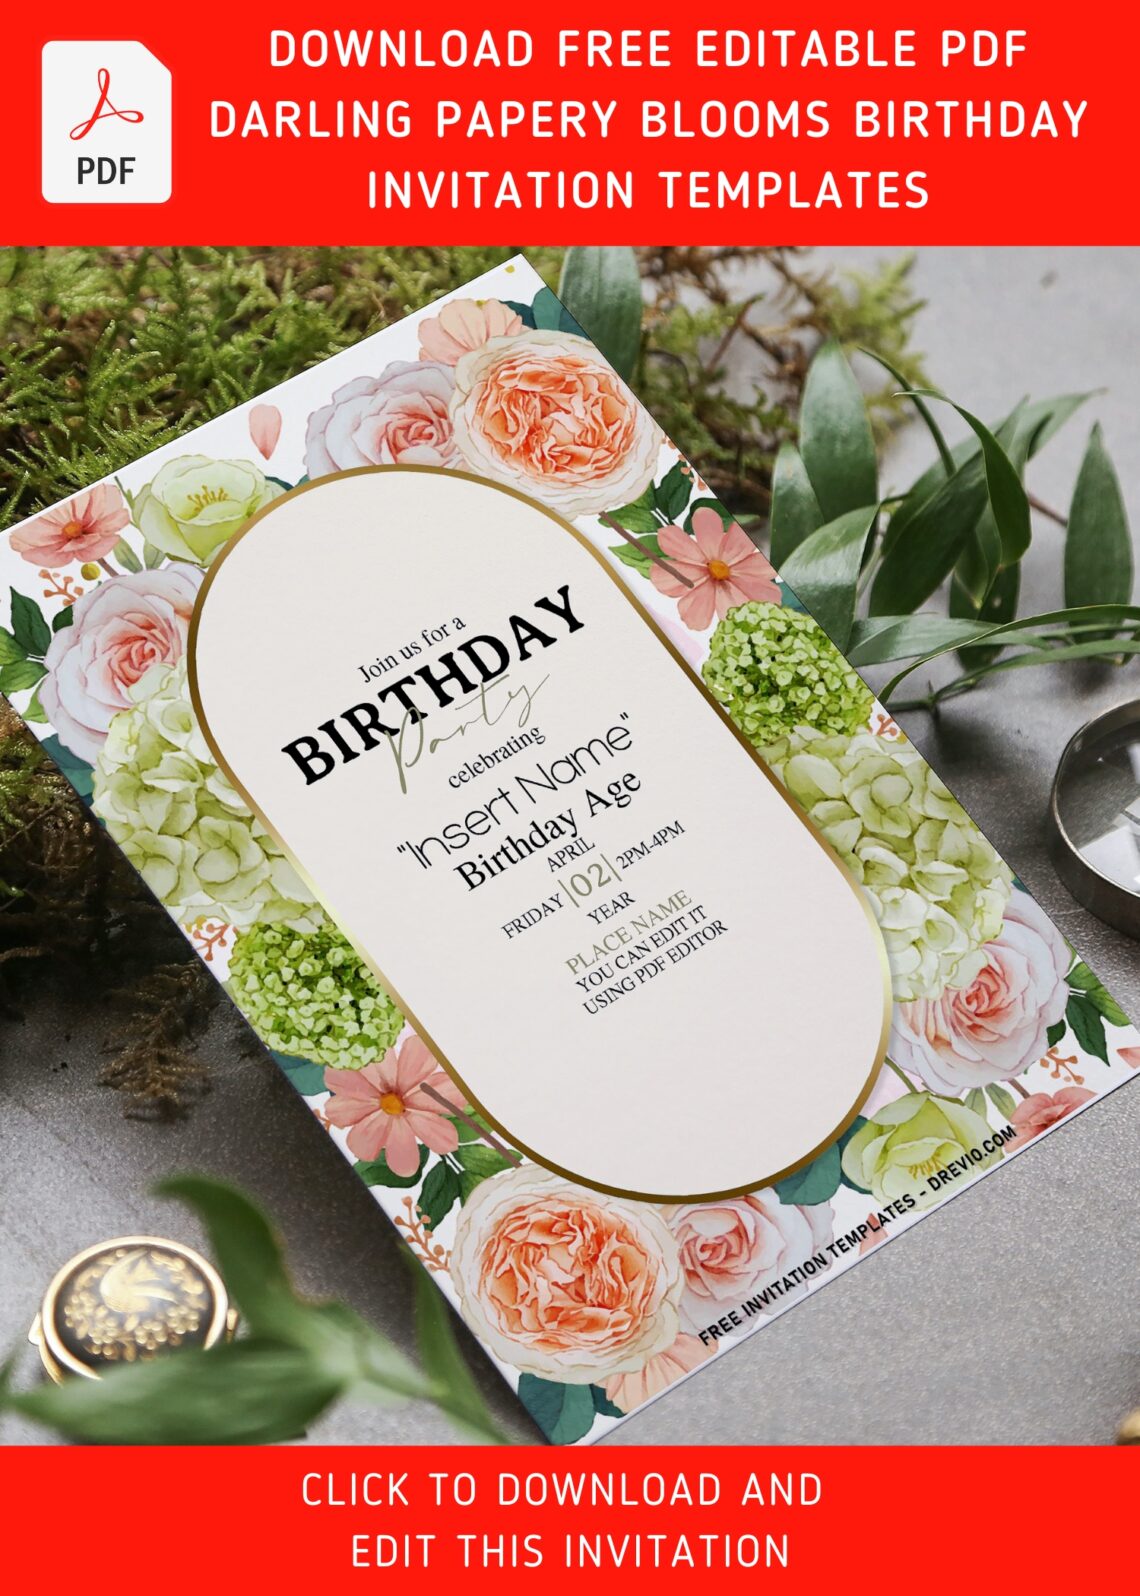 (Free Editable PDF) Darling Papery Blooms Birthday Invitation Templates with watercolor white poppy